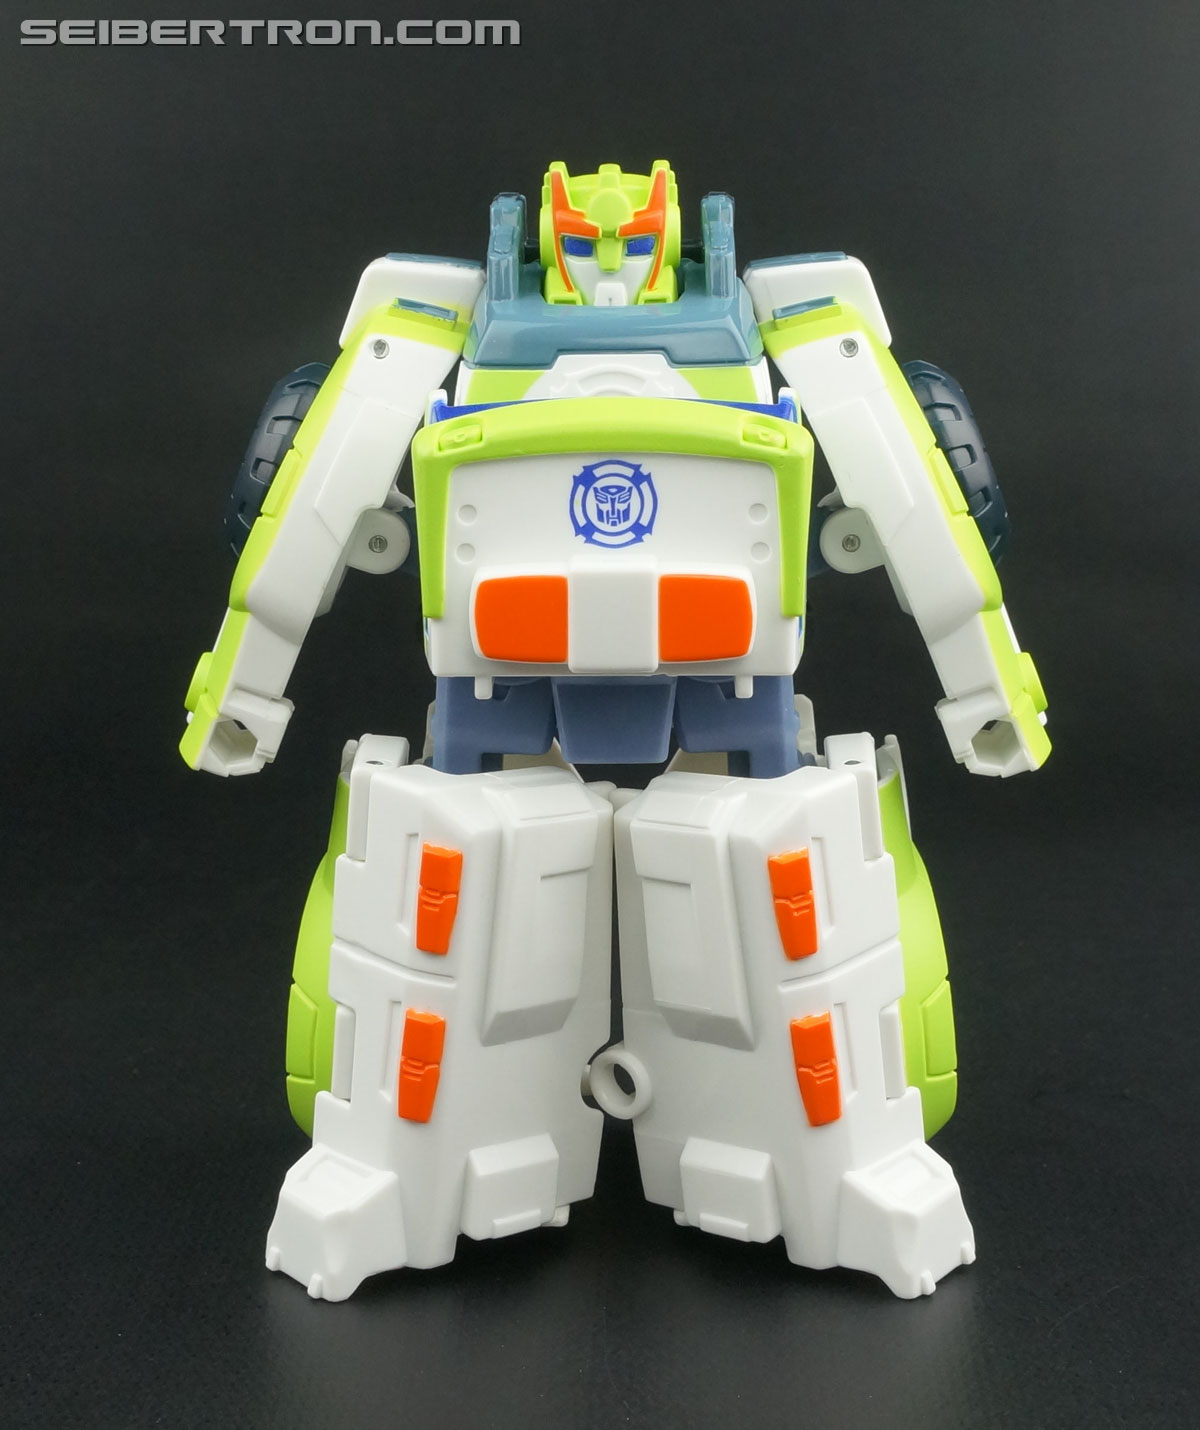 Transformers Rescue Bots Medix the Doc-Bot (Image #30 of 61)